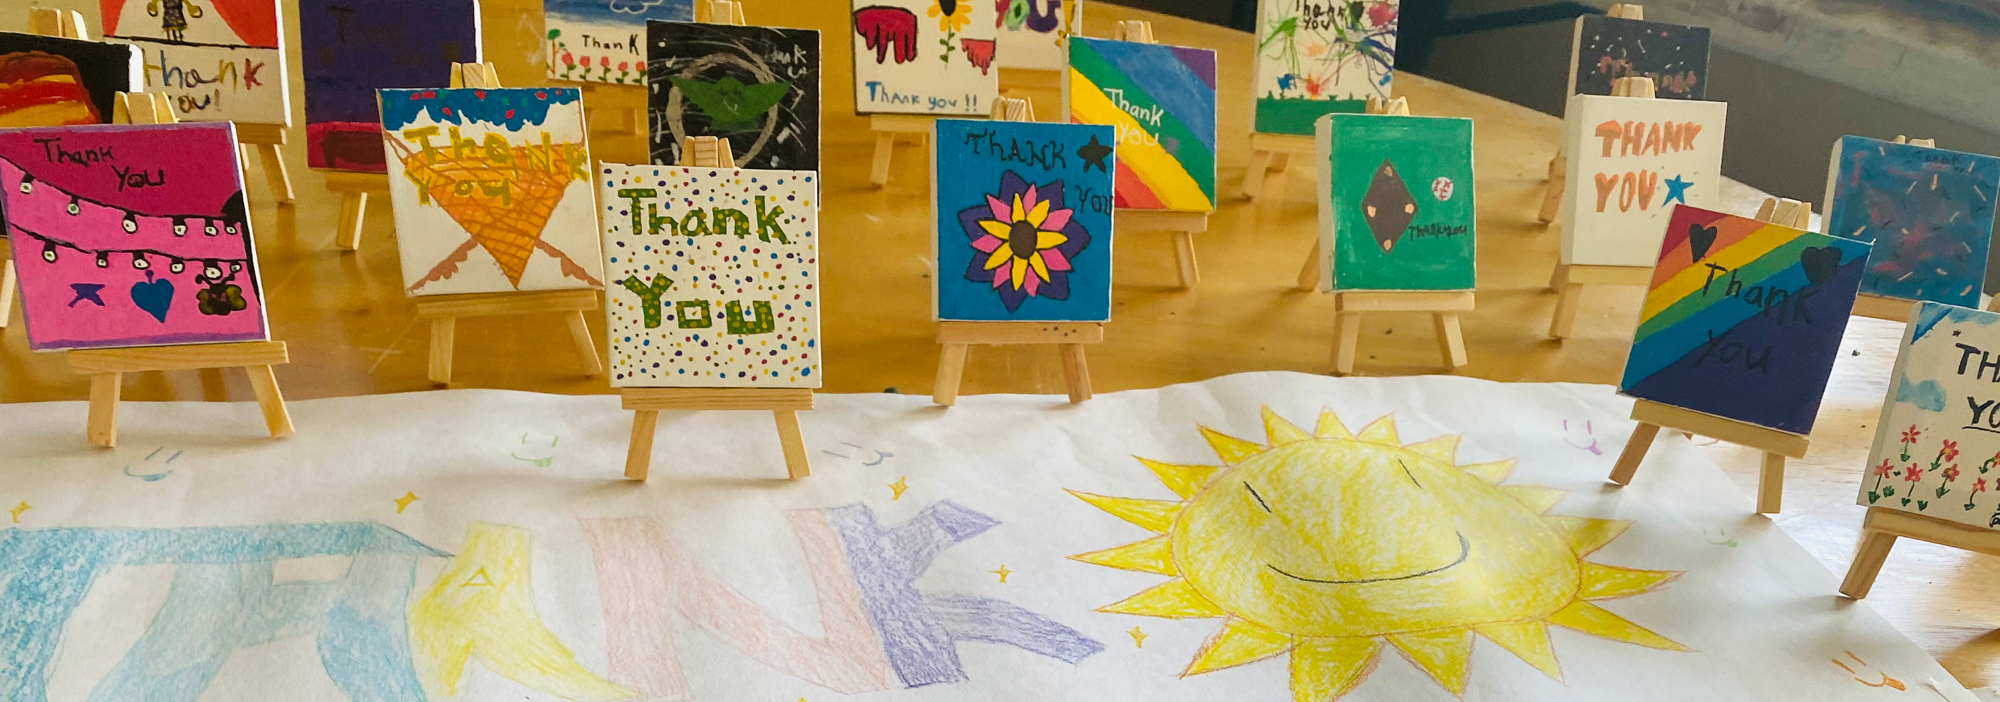 a group of children's artwork displayed on easels